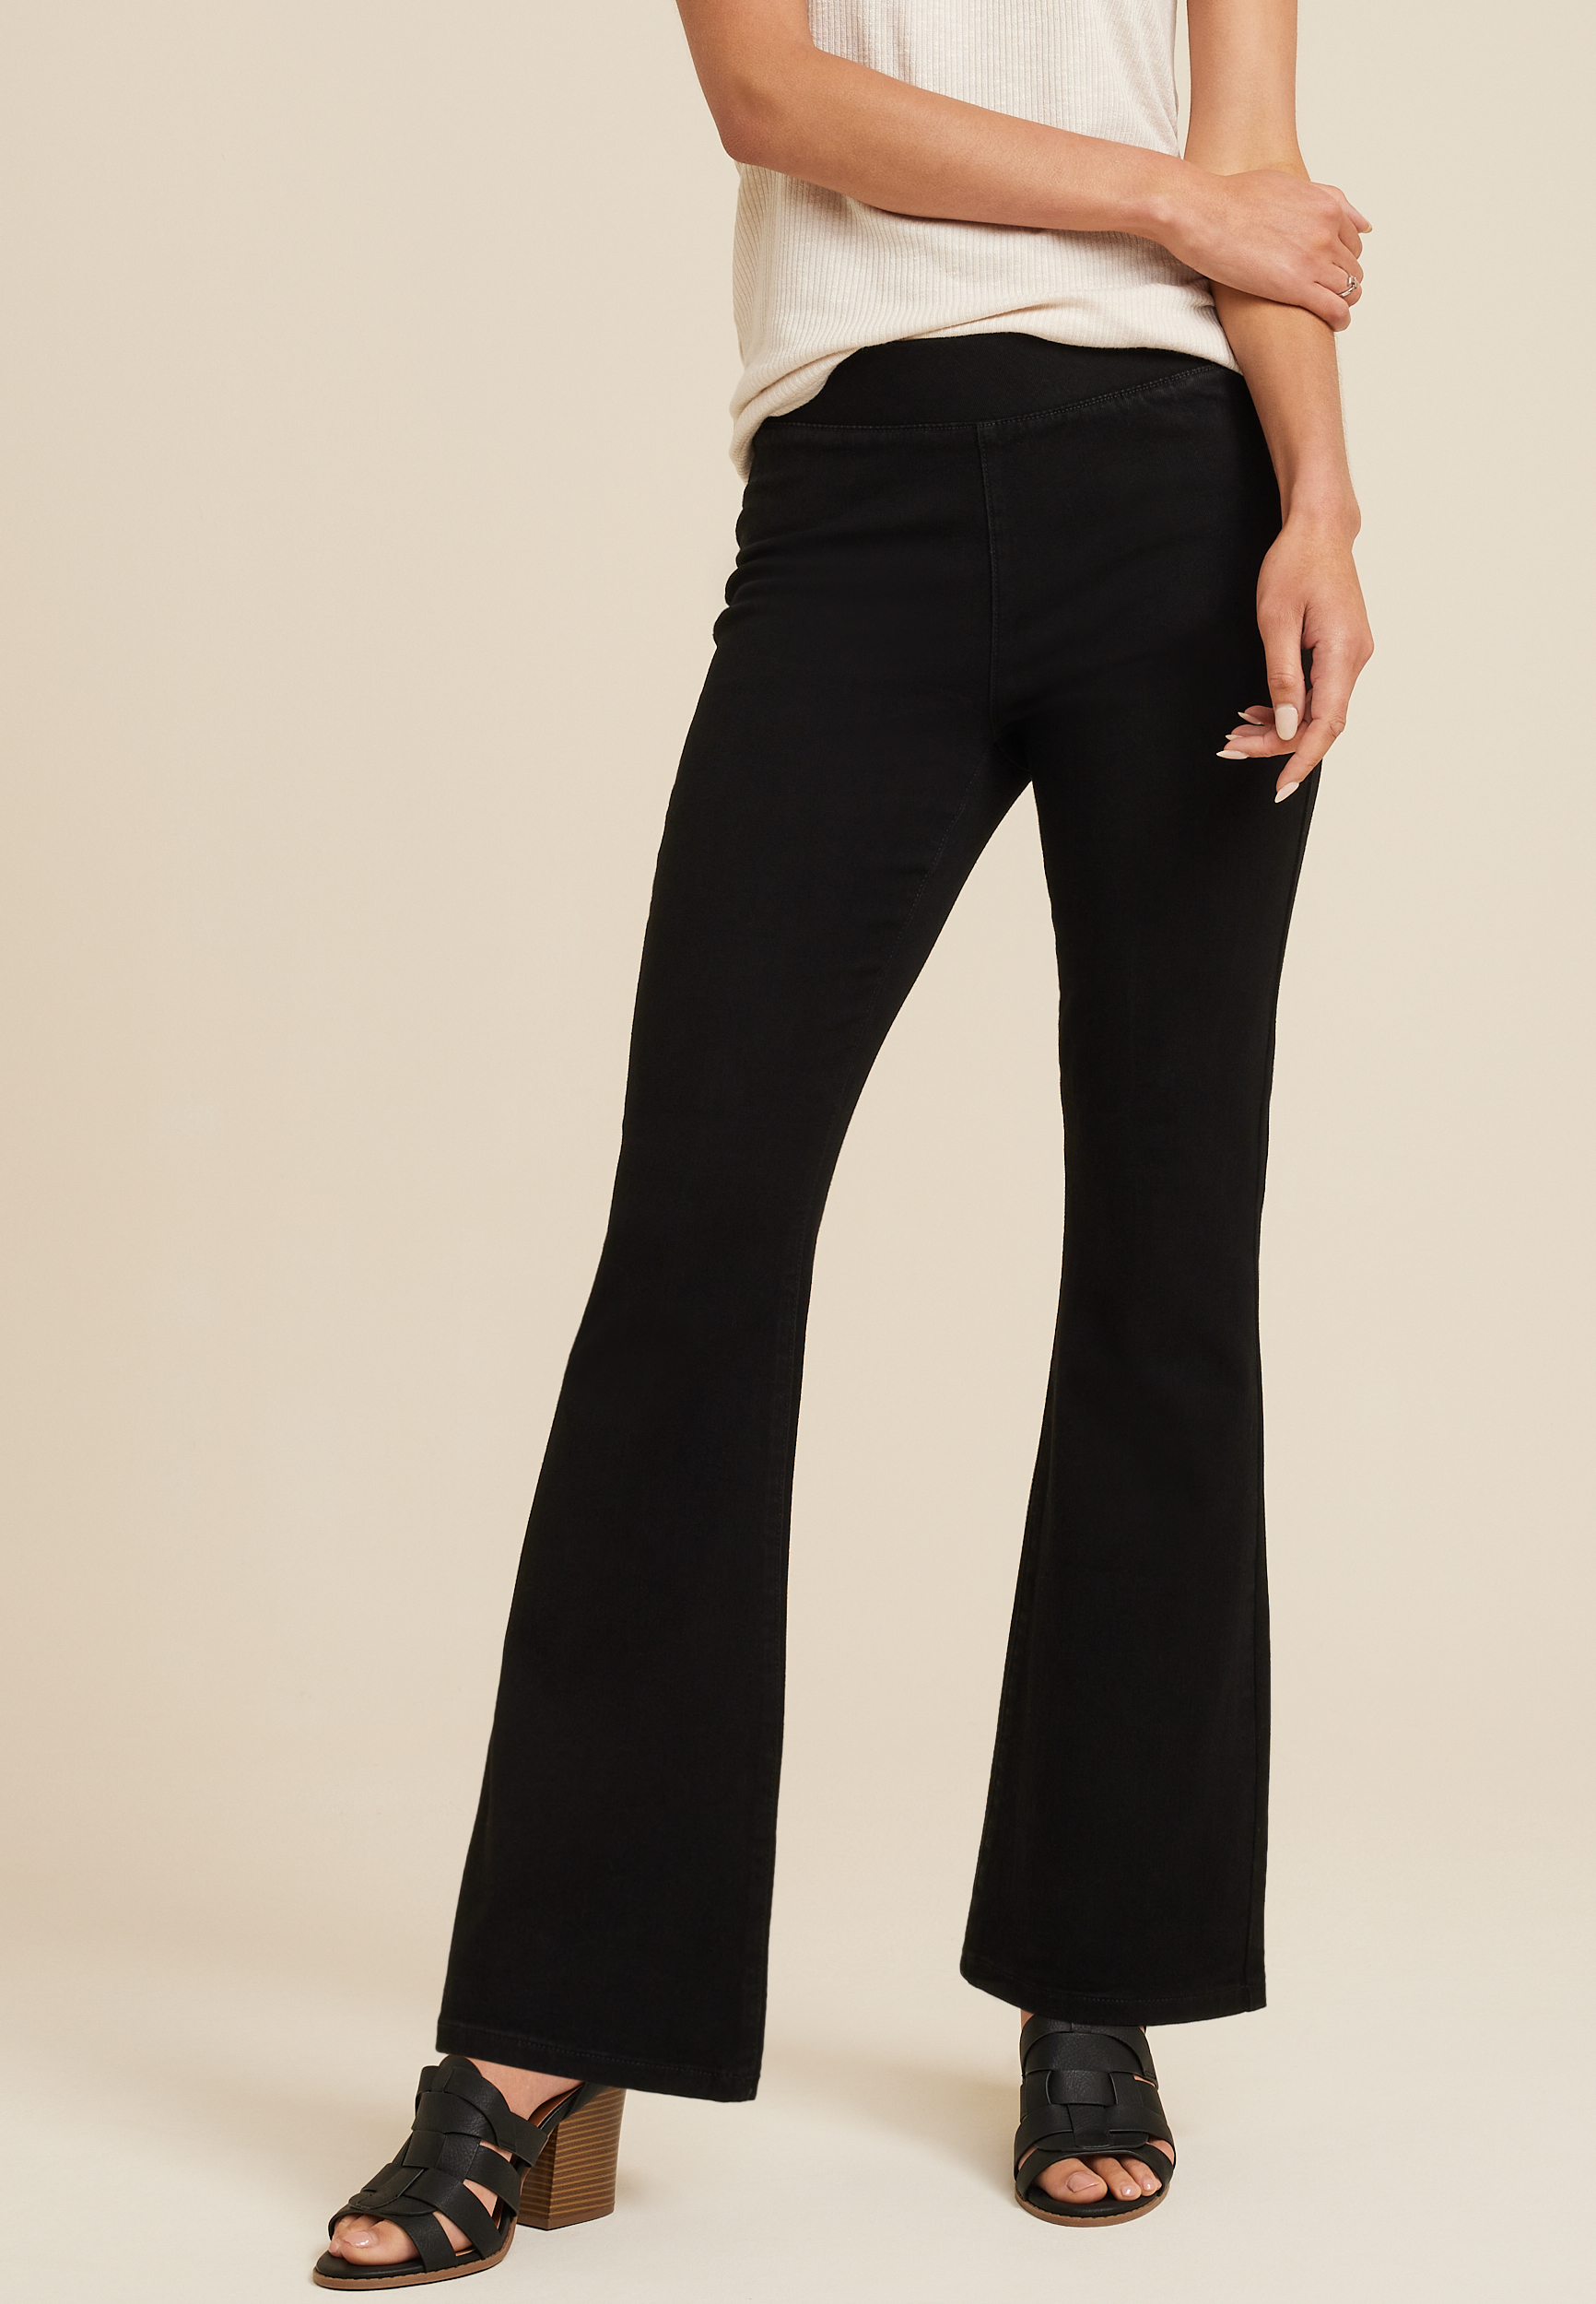 m jeans by maurices™ Black Flare Pull On High Rise Jean | maurices